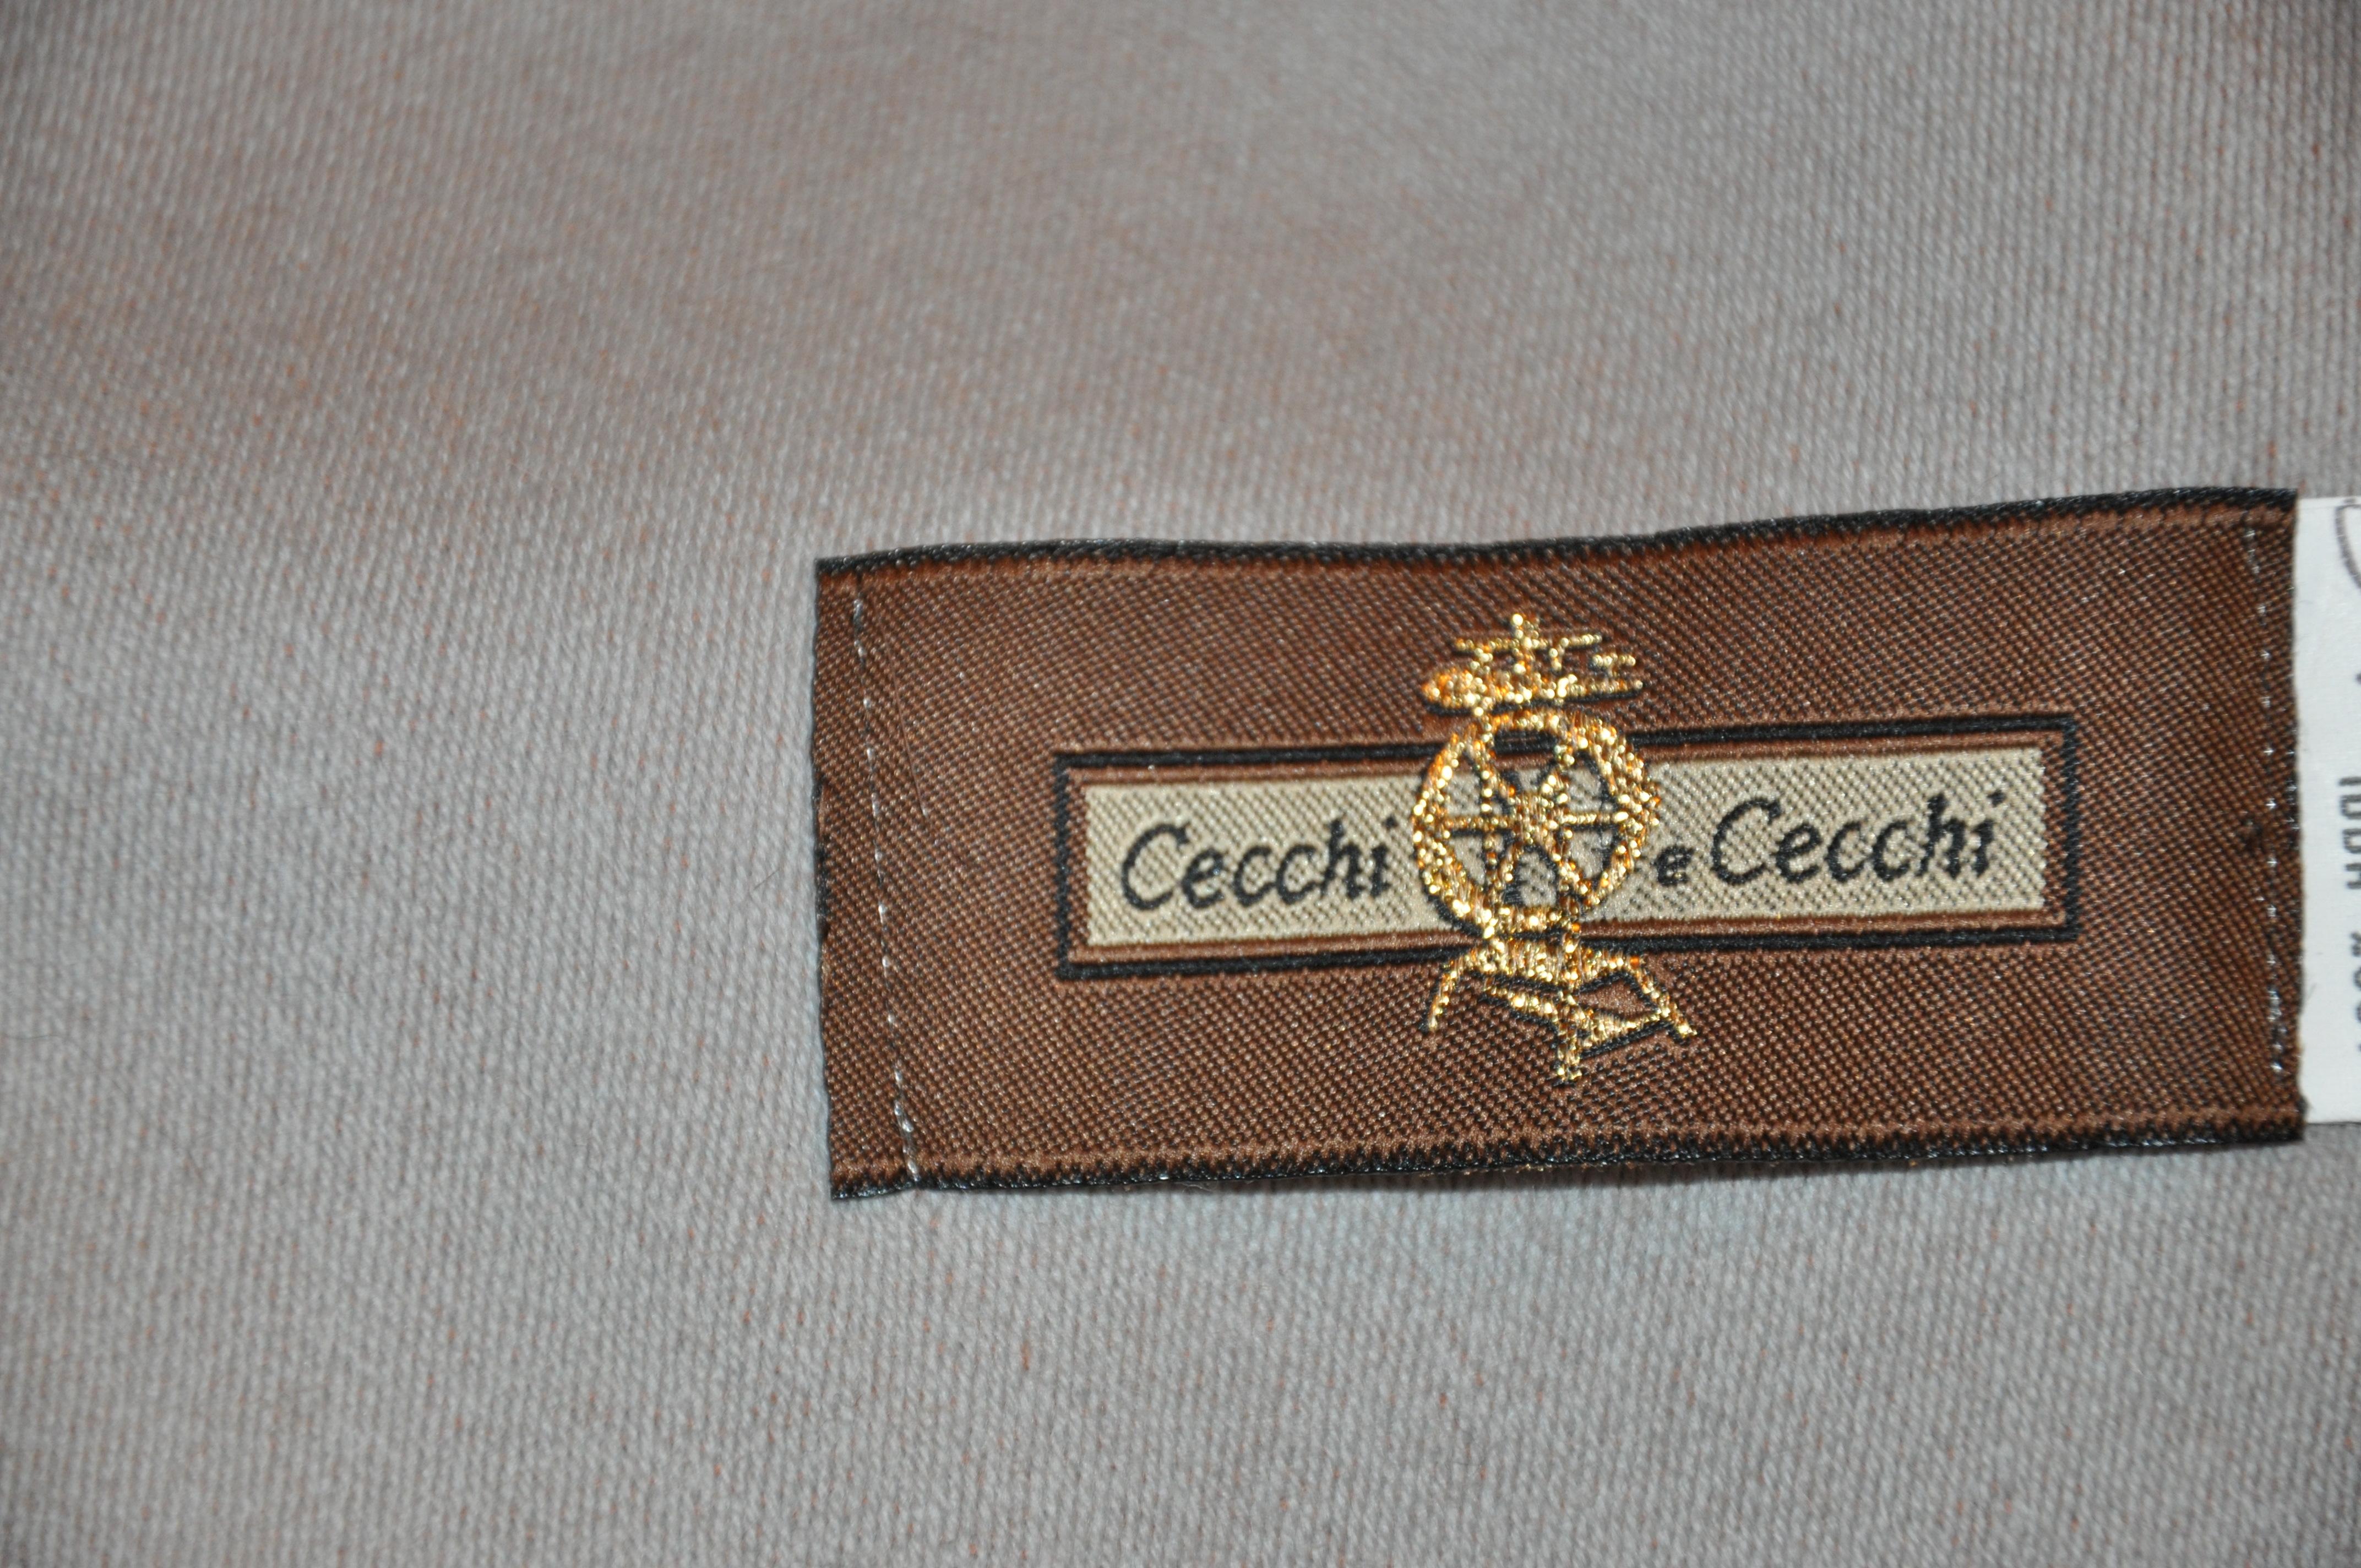 Cecchi Cecchi Luxurious Warm Beige & Gray Fringe Wool Shawl In Good Condition For Sale In New York, NY